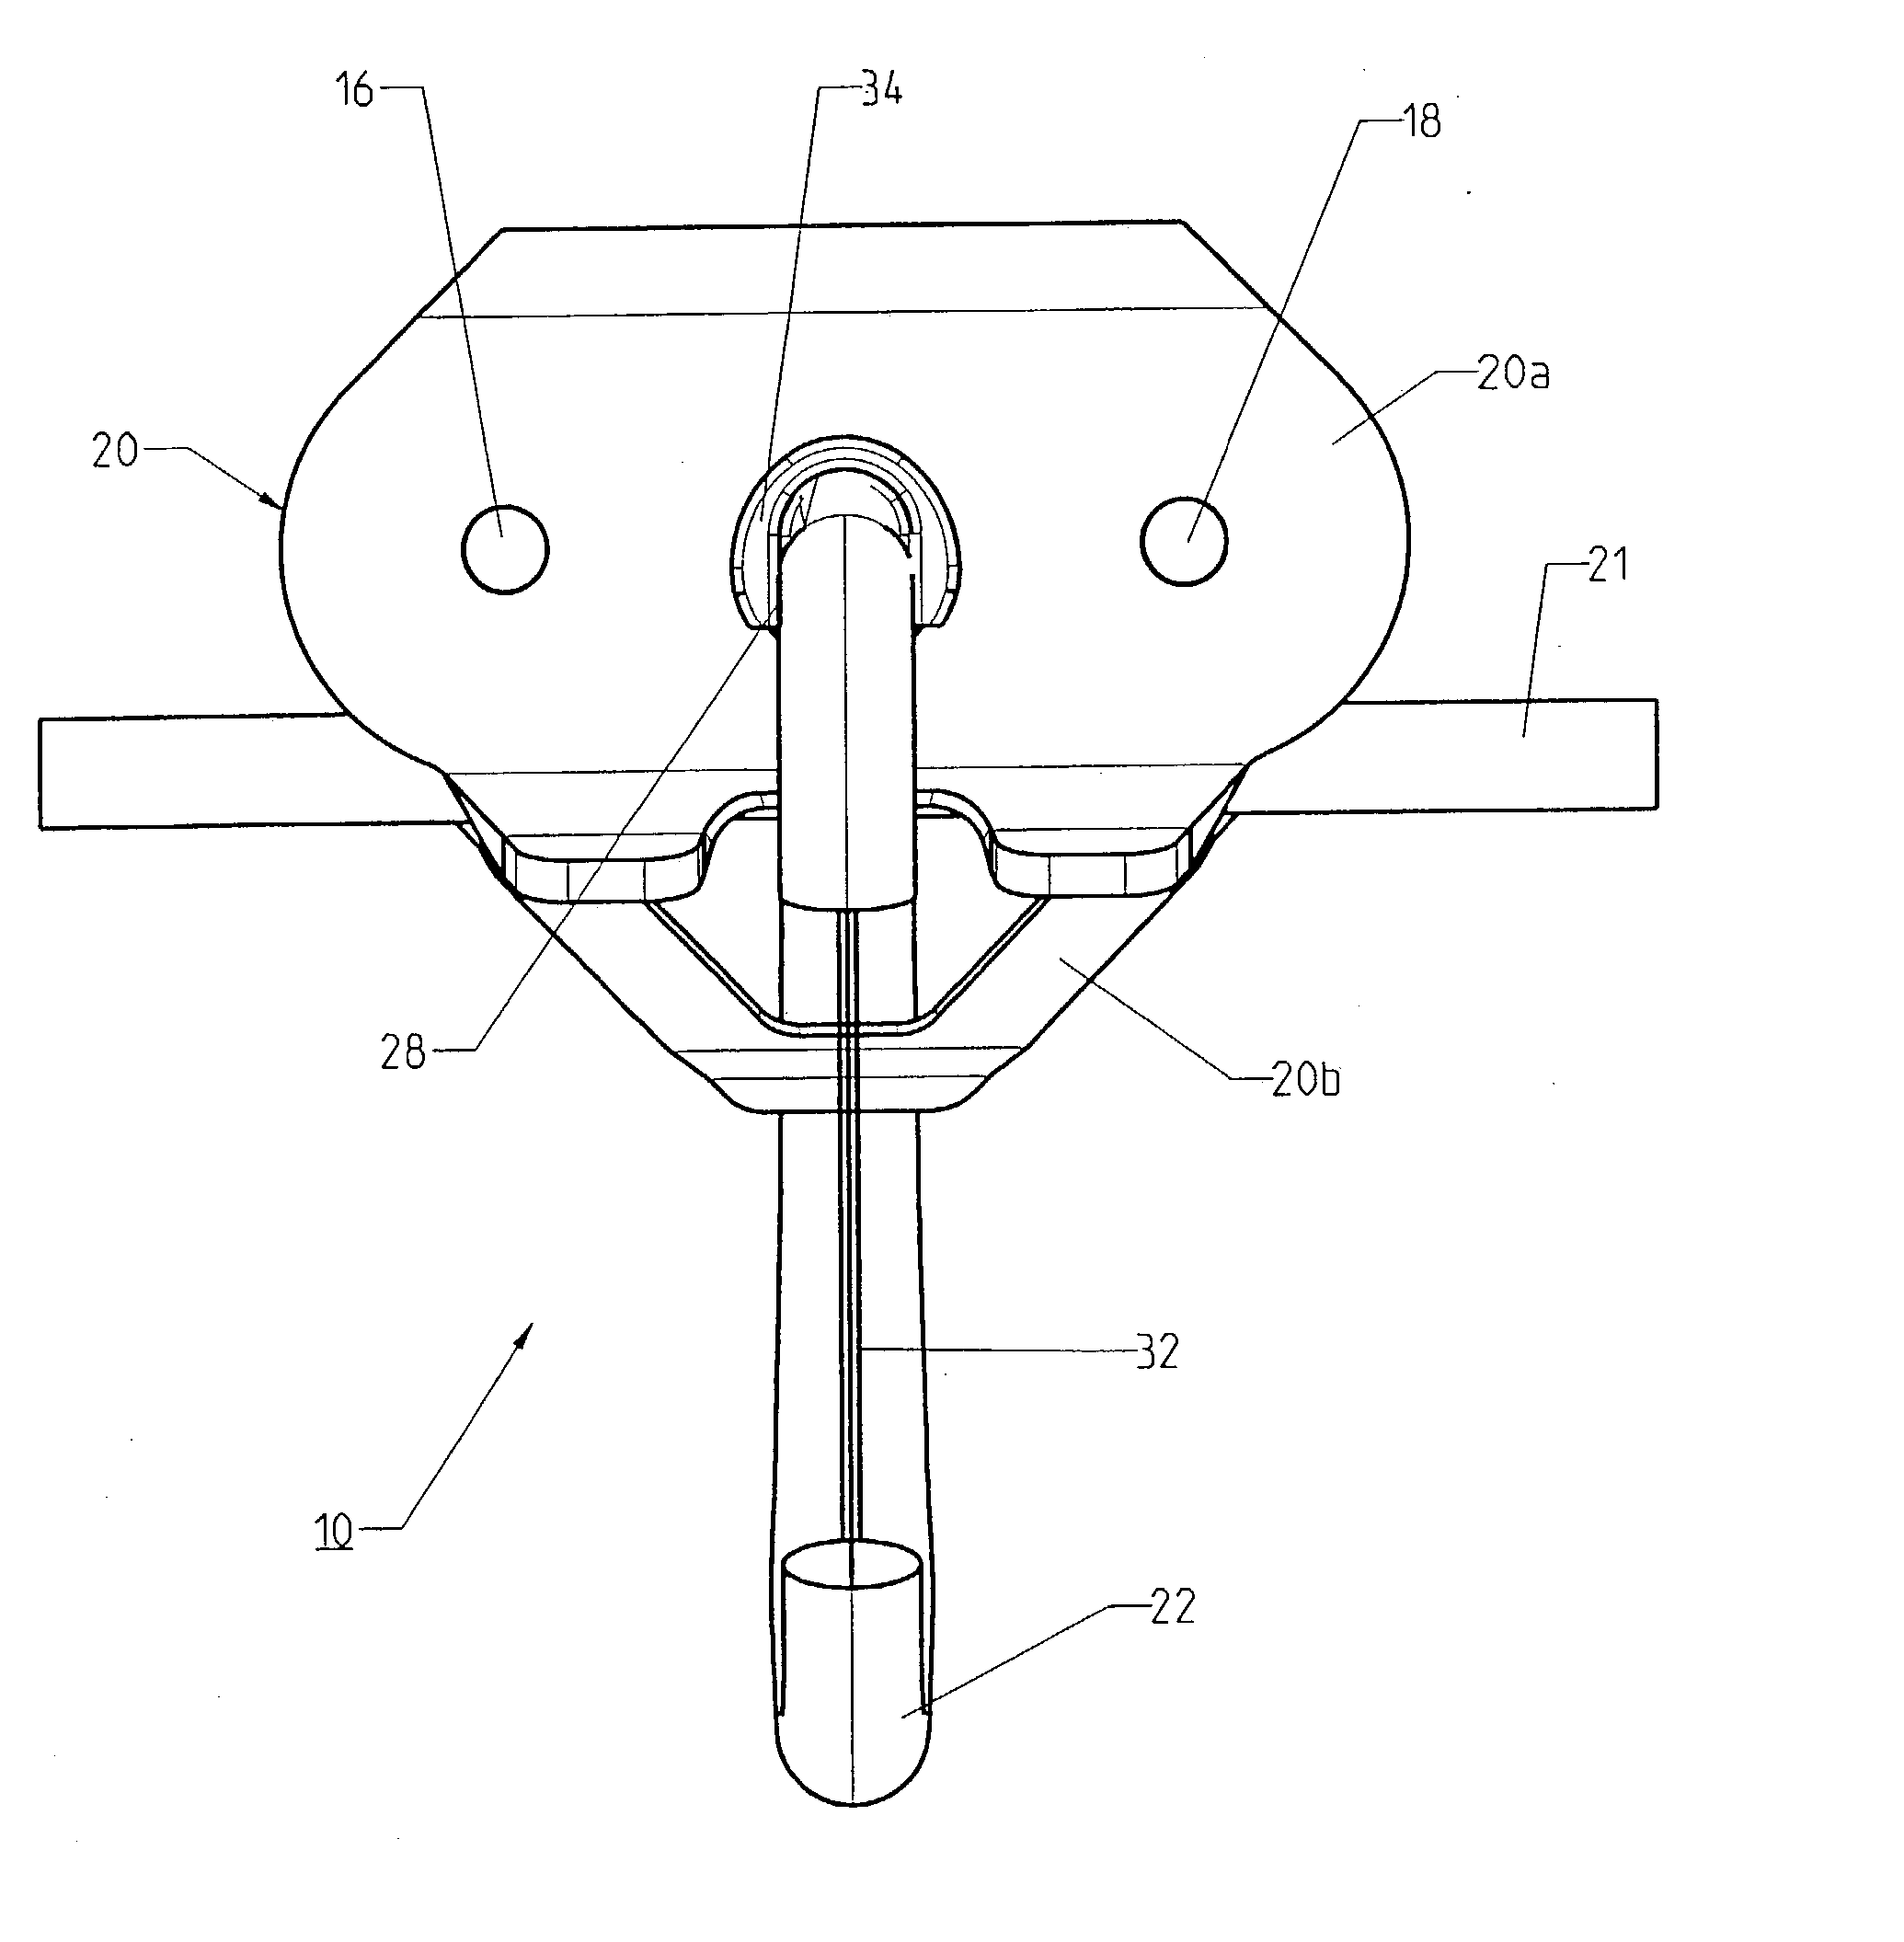 Double pulley device for use for Tyrolean traversing on a rope or cable